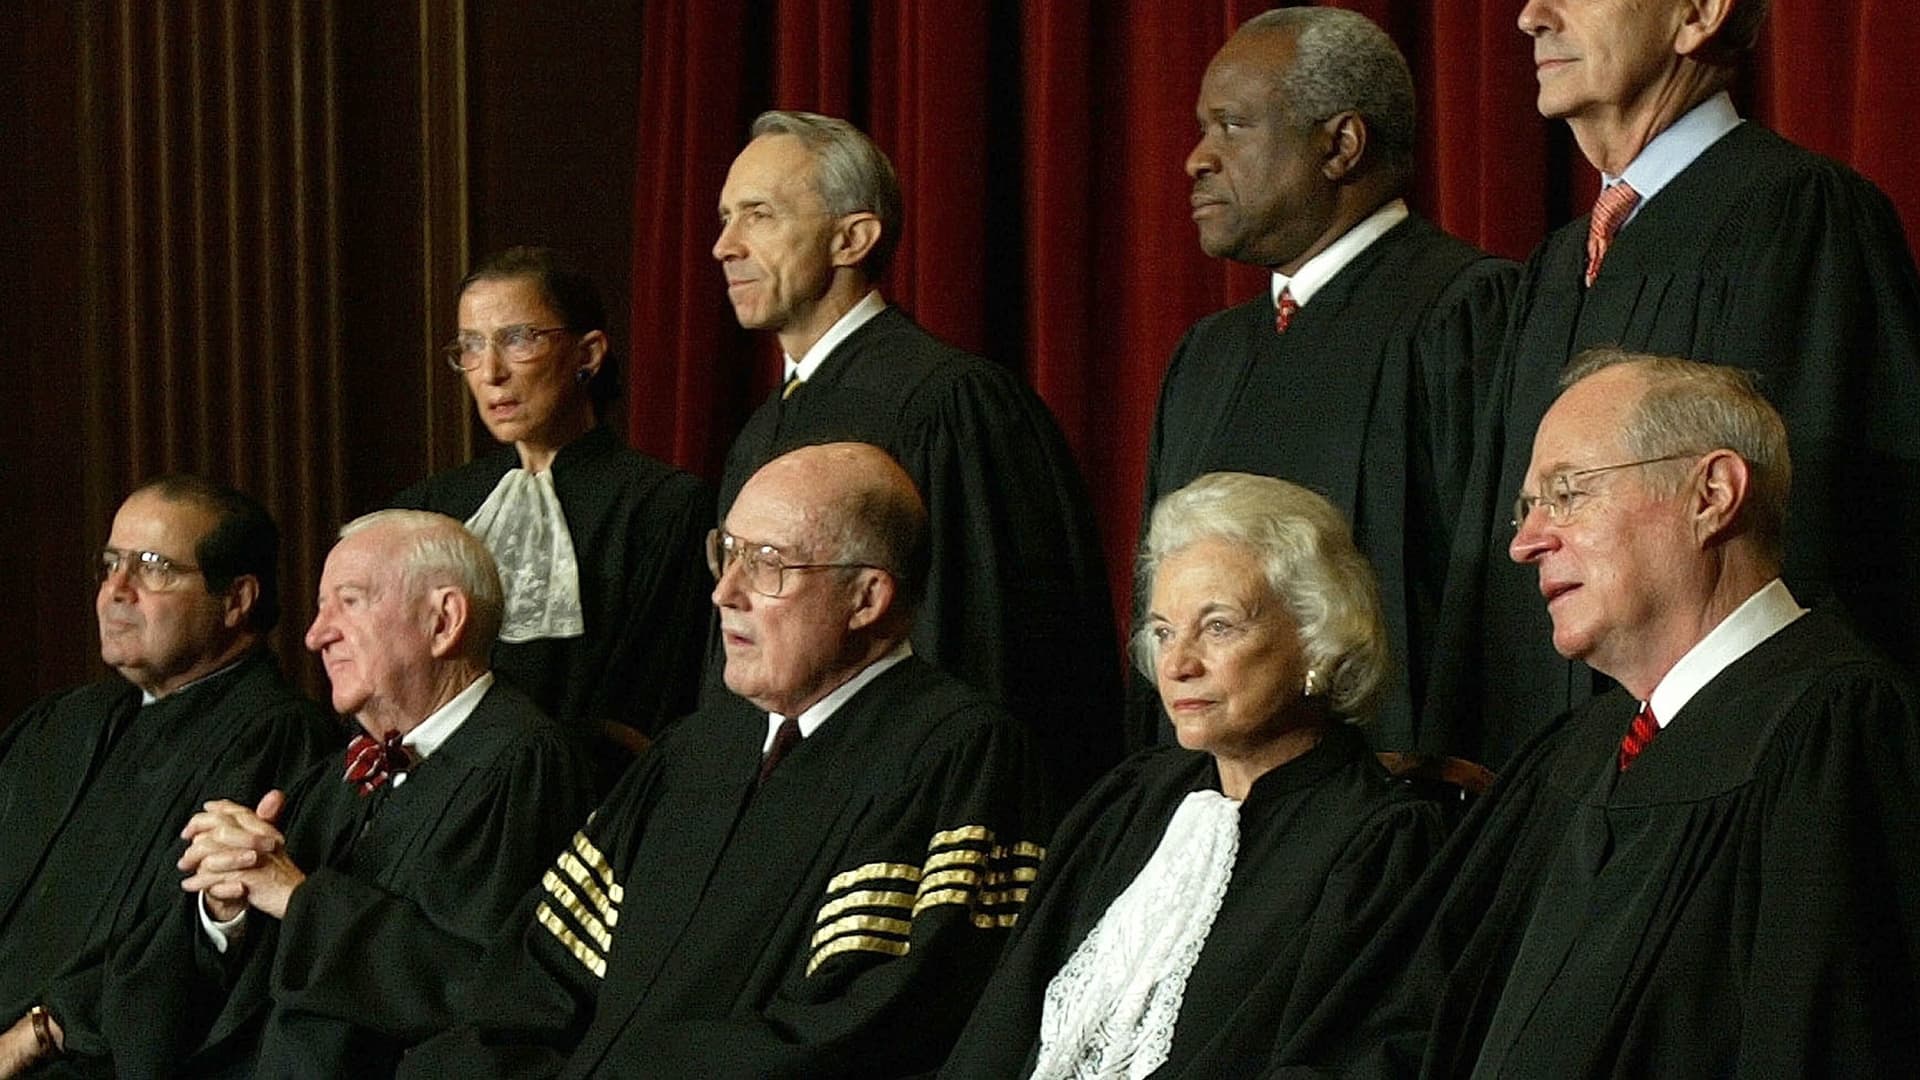 US Supreme Court Justices (L-R, Seated) Associate Justice Antonin Scalia, Associate Justice John Paul Stevens, Chief Justice William H. Rehnquist, Associate Justice Sandra Day O'Connor, Associate Justice Anthony M. Kennedy, (L-R, Standing) Associate Justice Ruth Bader Ginsburg, Associate Justice David H. Souter, Associate Justice Clarence Thomas and Stephen G. Breyer pose for pictures at the US Supreme Court December 5, 2003 in Washington, DC.